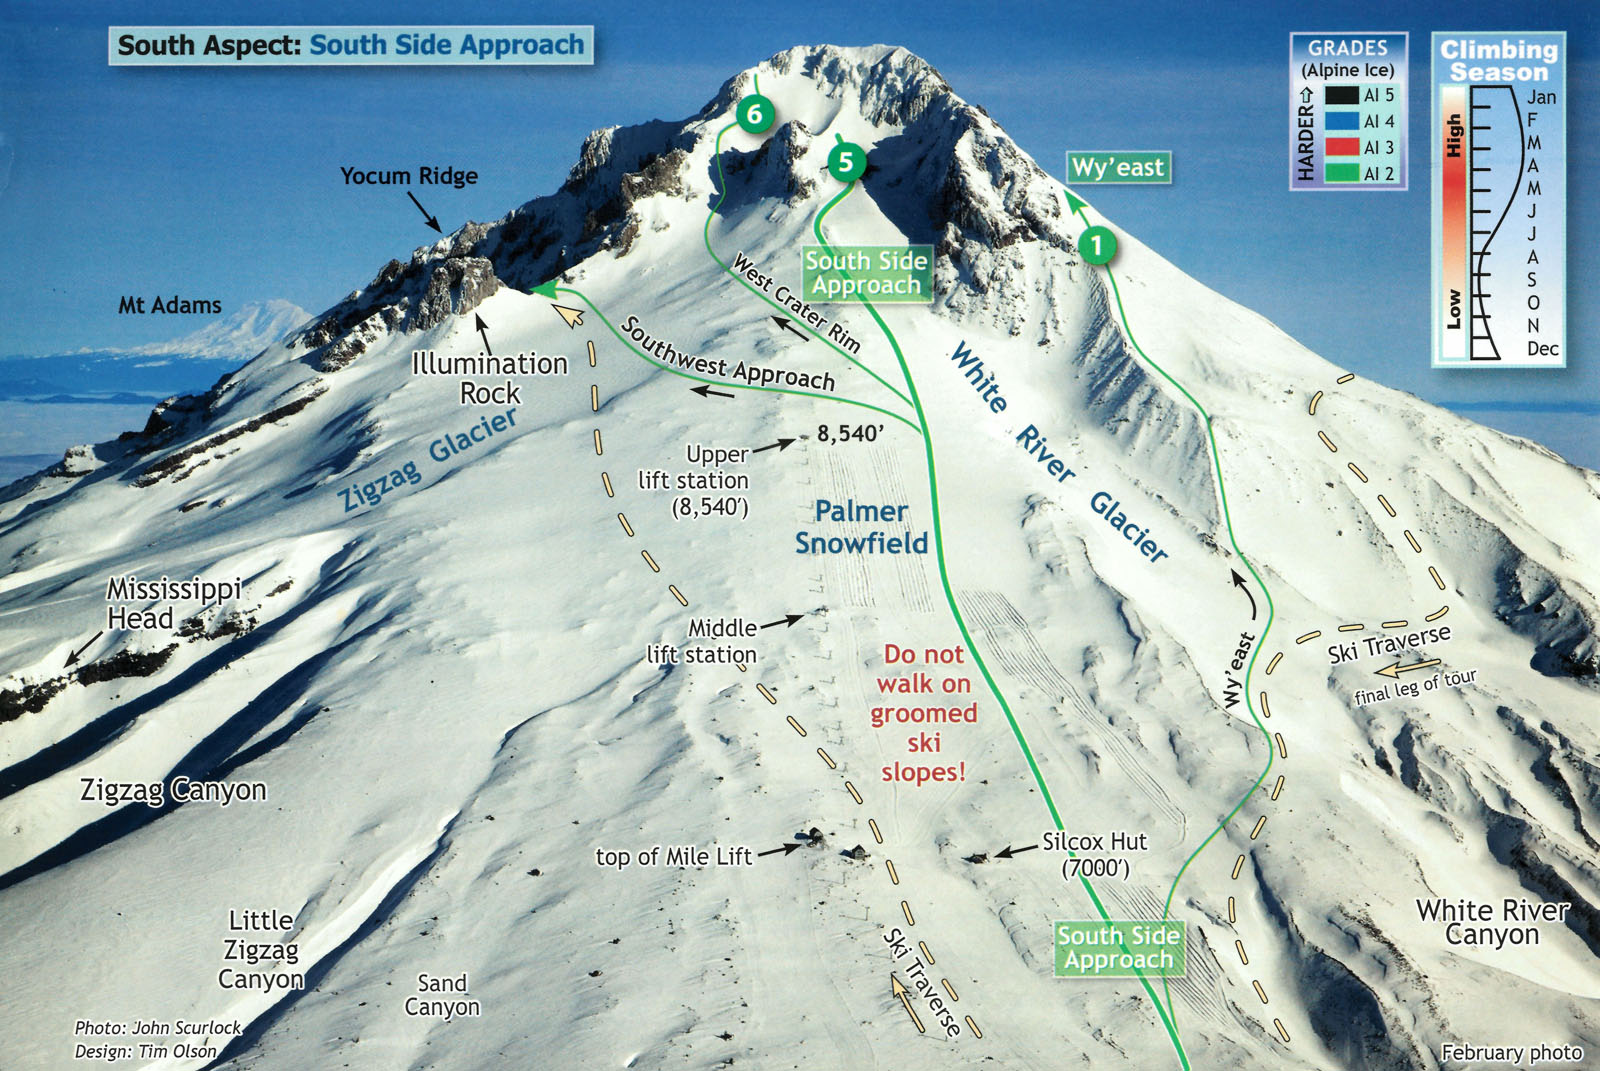 Image credit: Mt Hood Climber's Guide by Bill Mullee